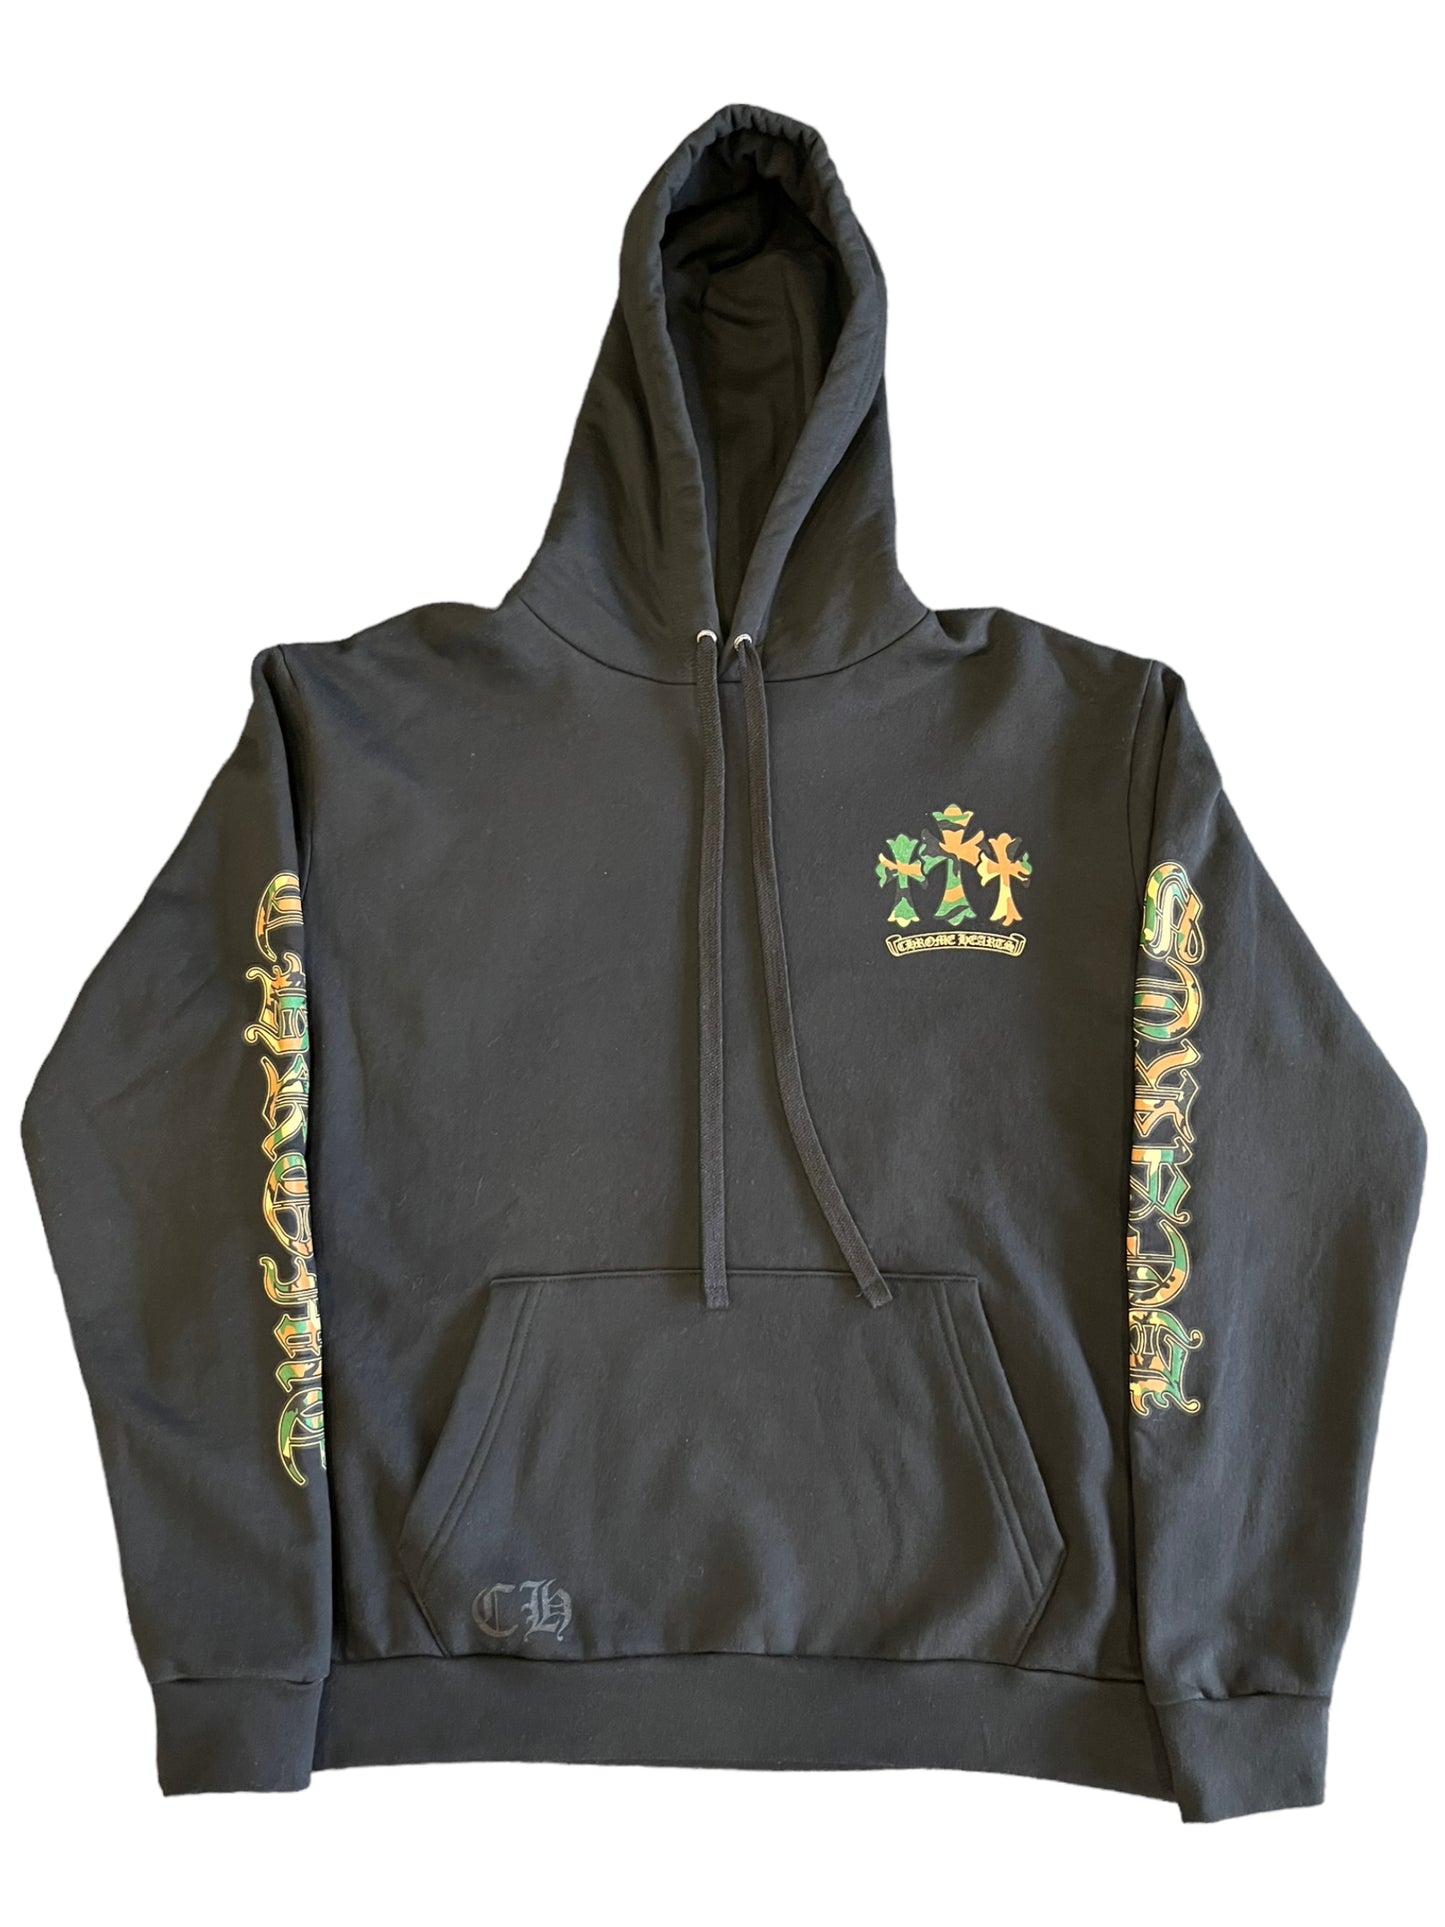 Chrome Hearts Camo Pullover Hoodie New